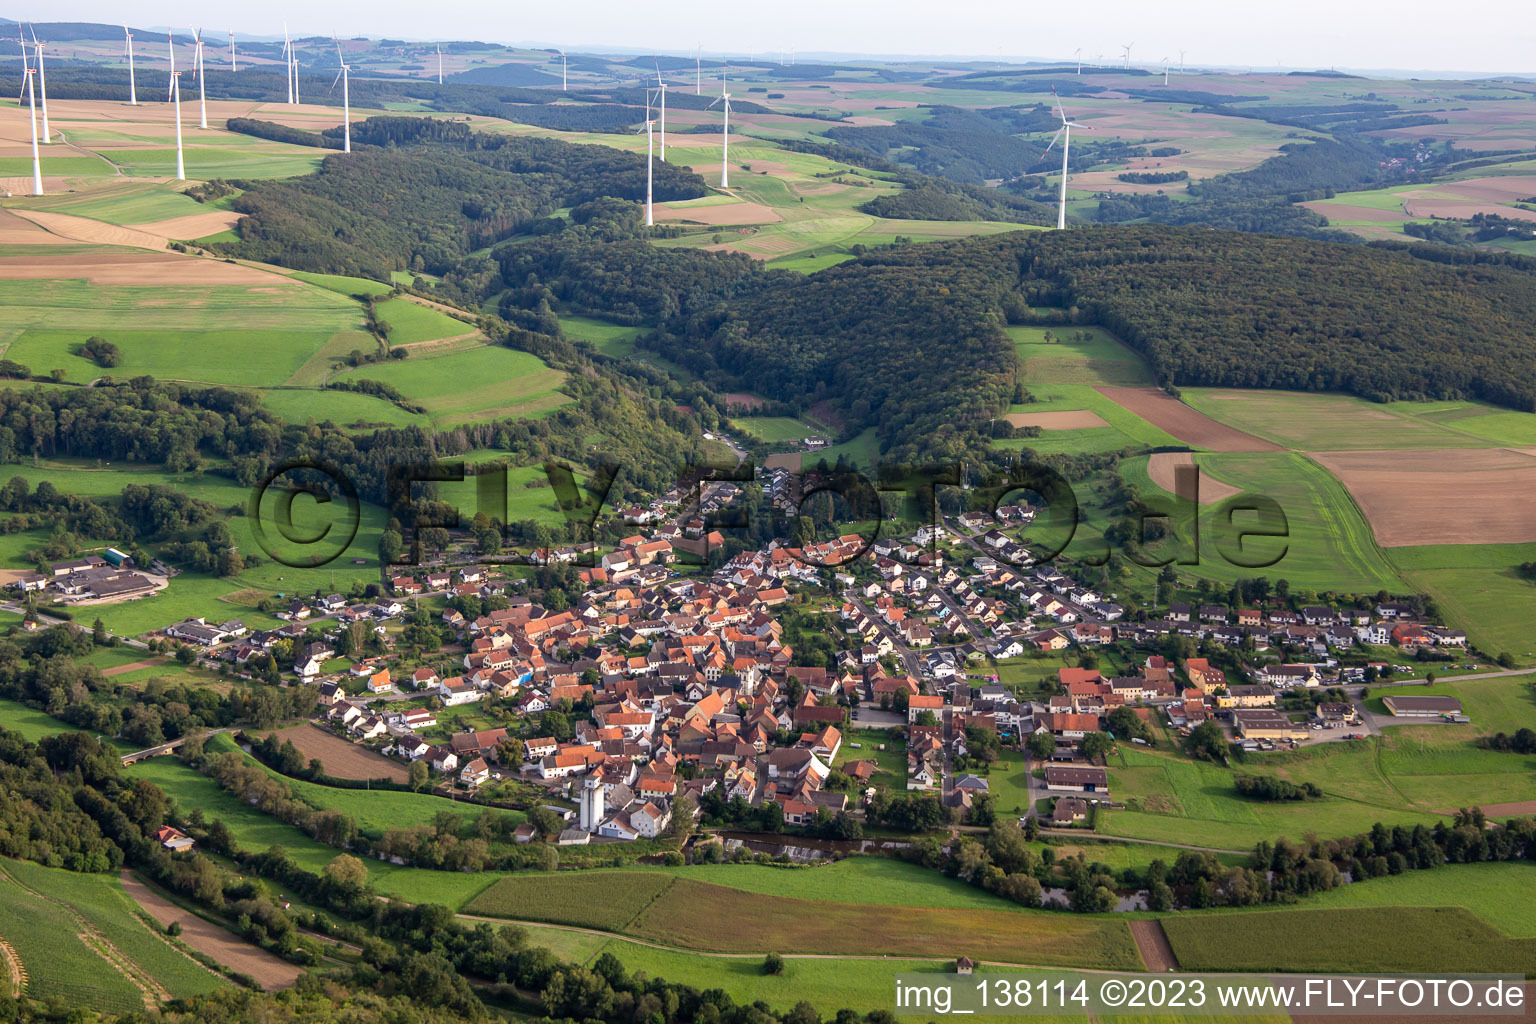 Aerial photograpy of Rehborn in the state Rhineland-Palatinate, Germany